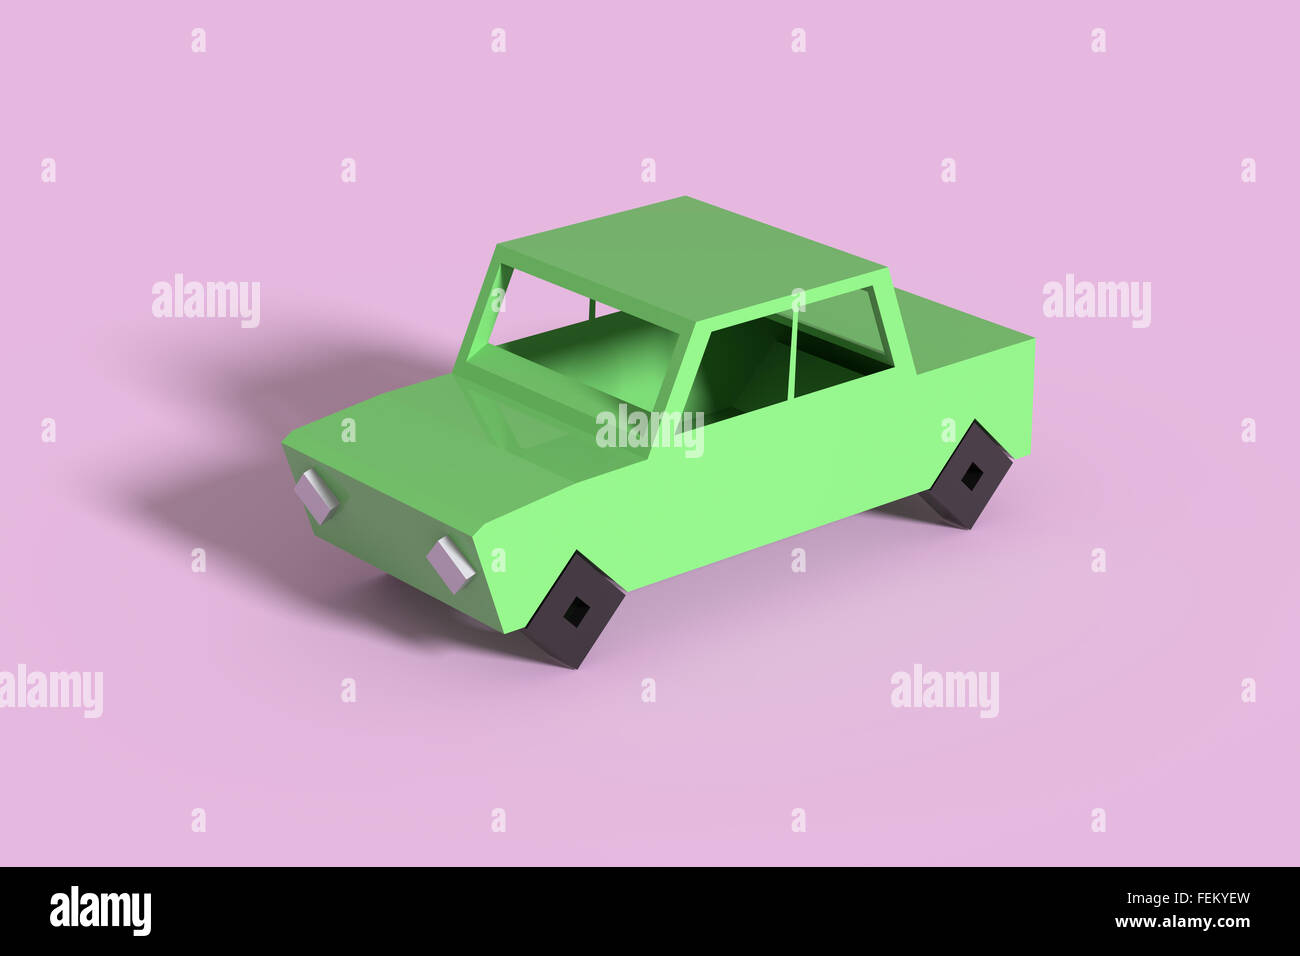 3d rendering in low poly of green car casting shadow on violet background. Stock Photo